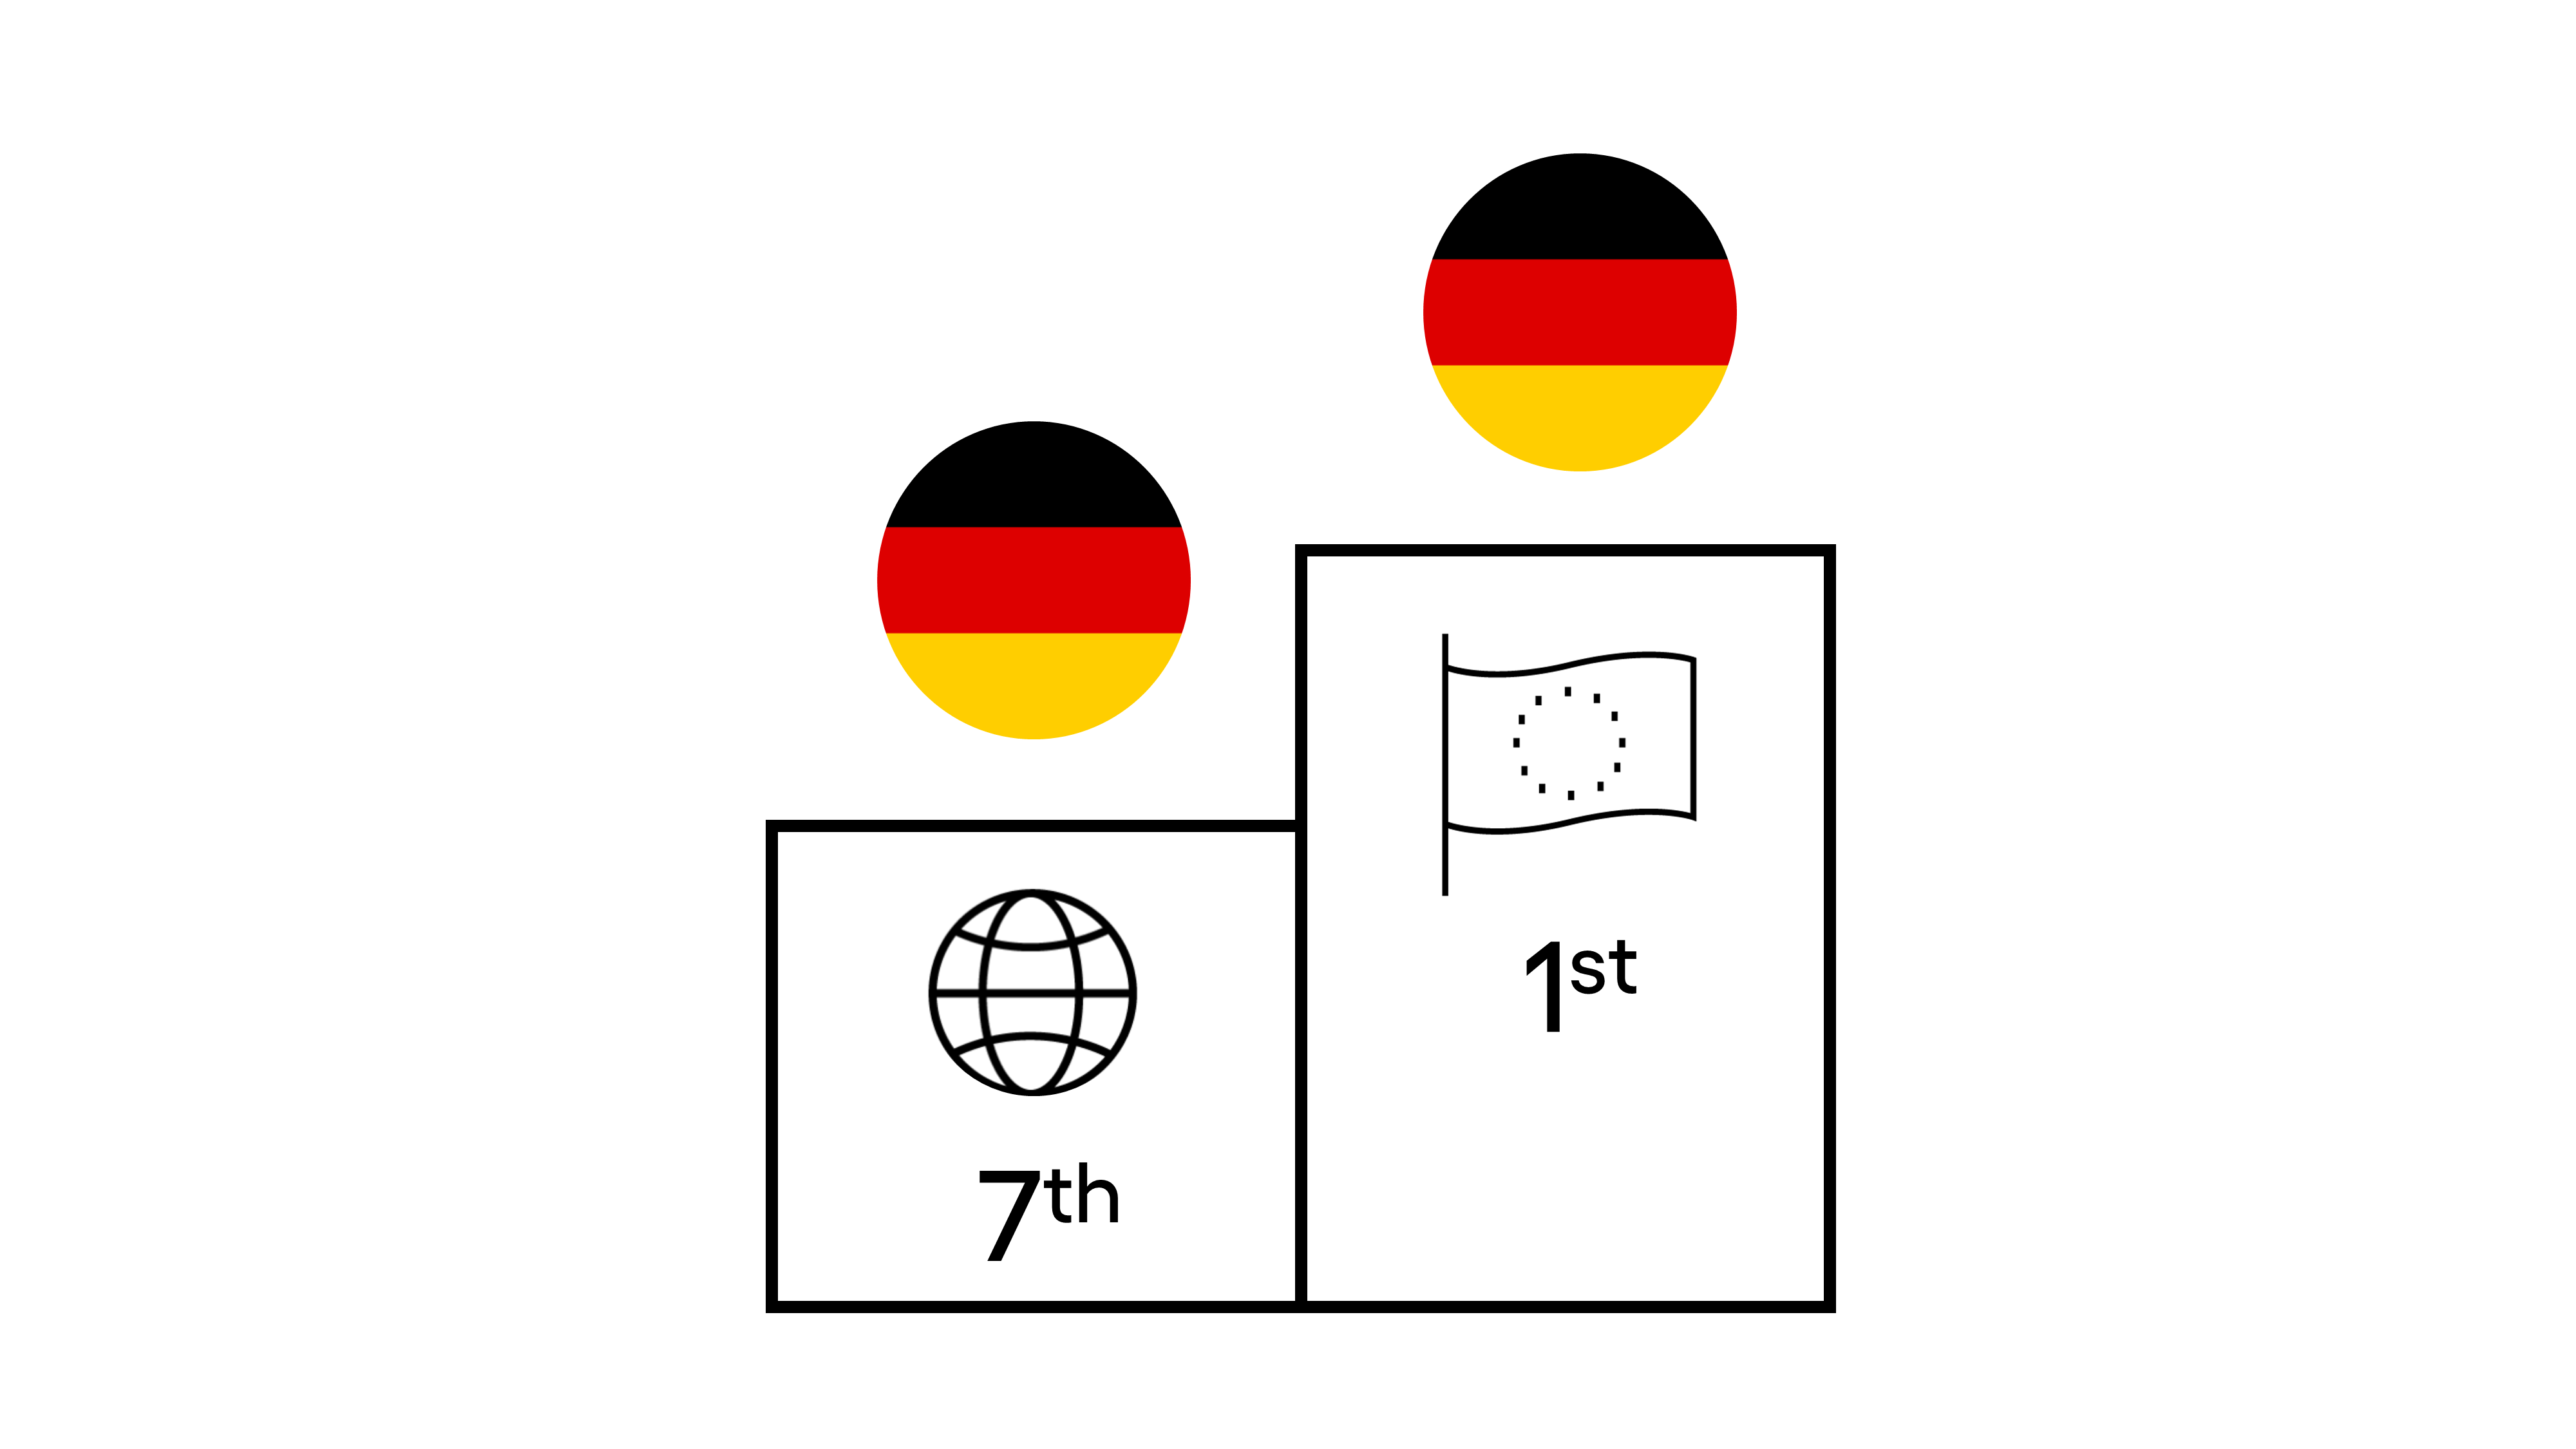 Germany ranks as the 7th top energy-consuming country in the world and ranks first in Europe.